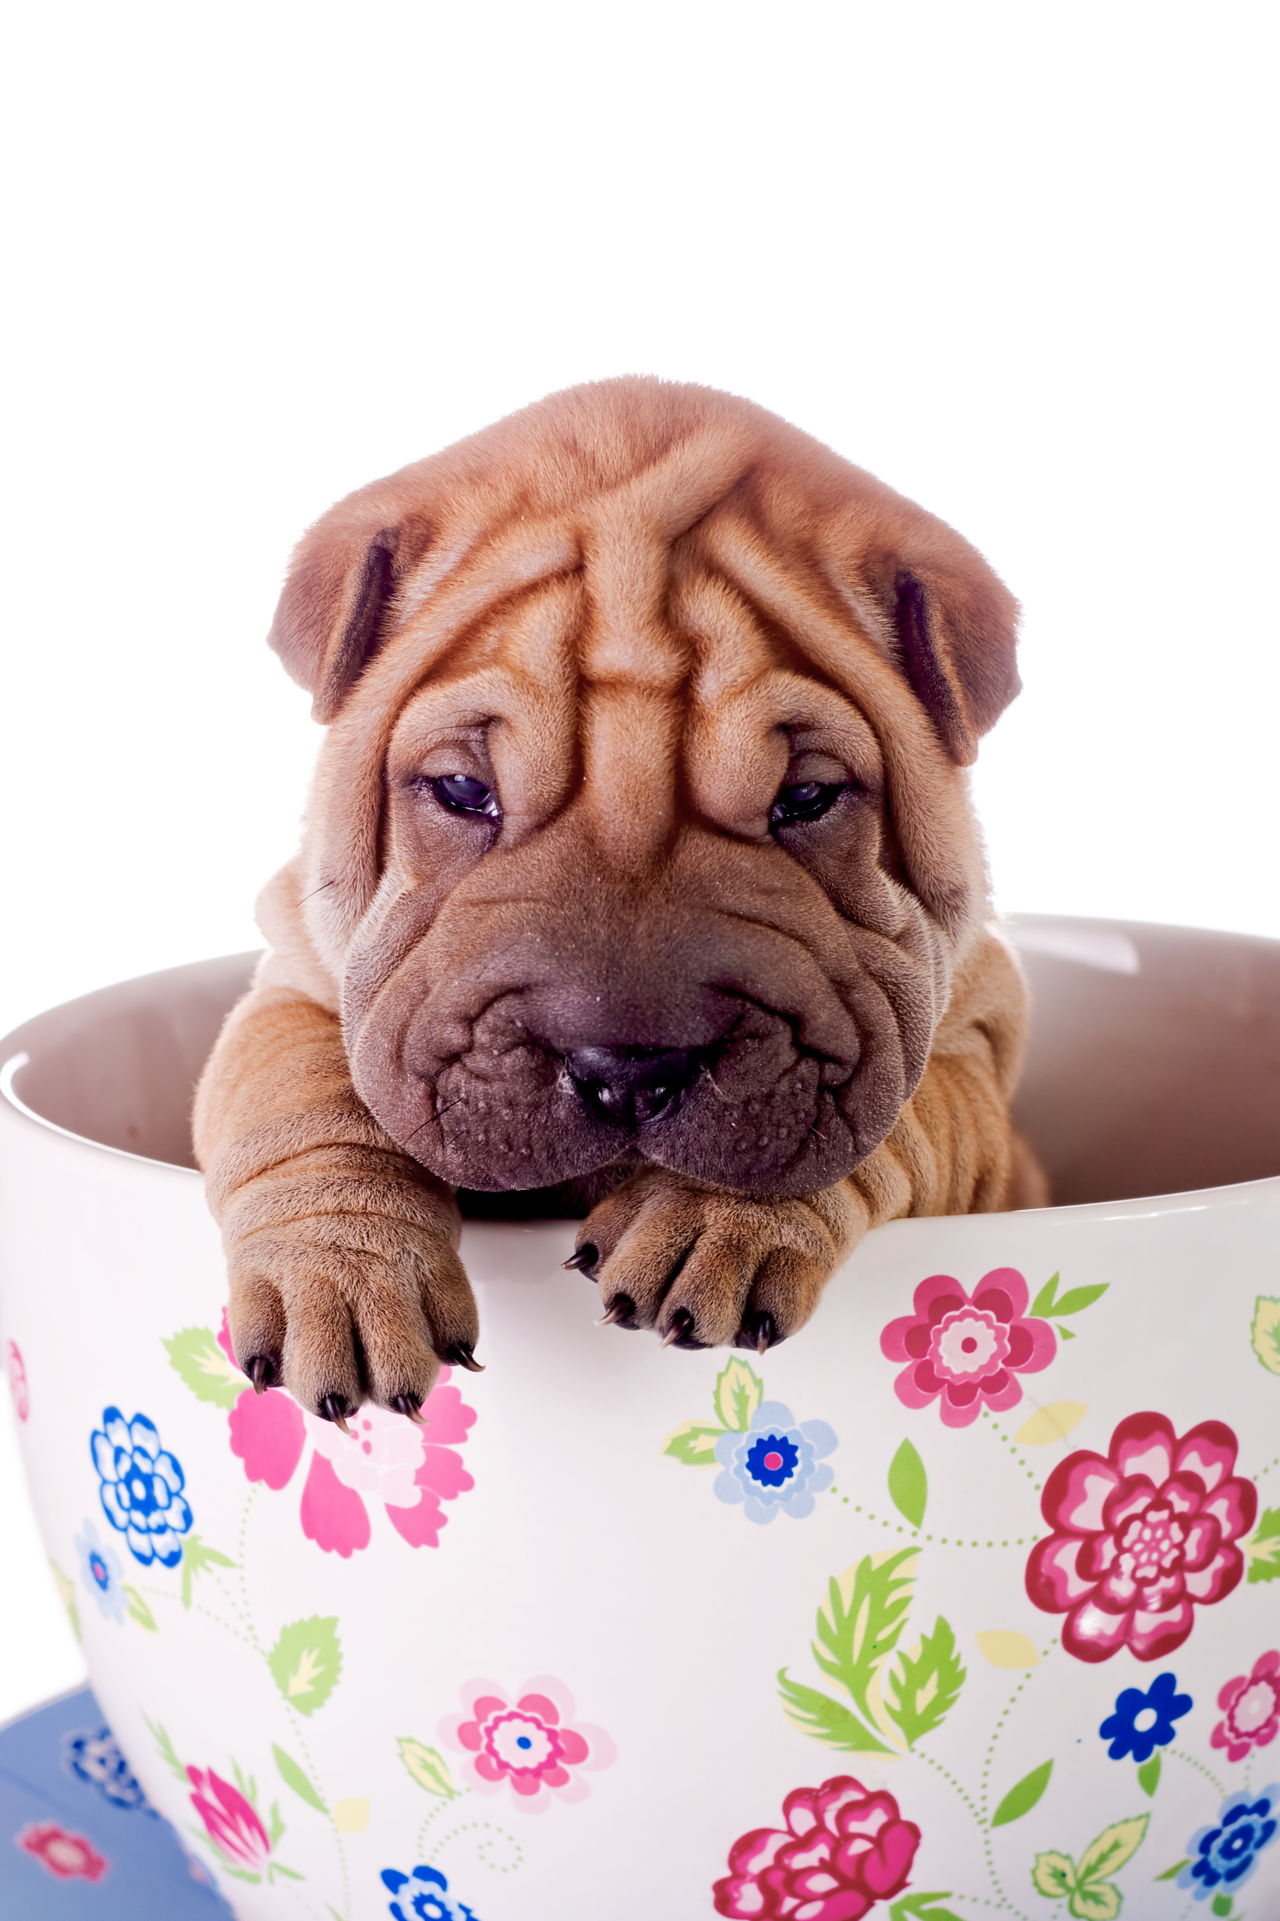 Top 20 Cutest Dog Breeds That are Guilty of Being Too